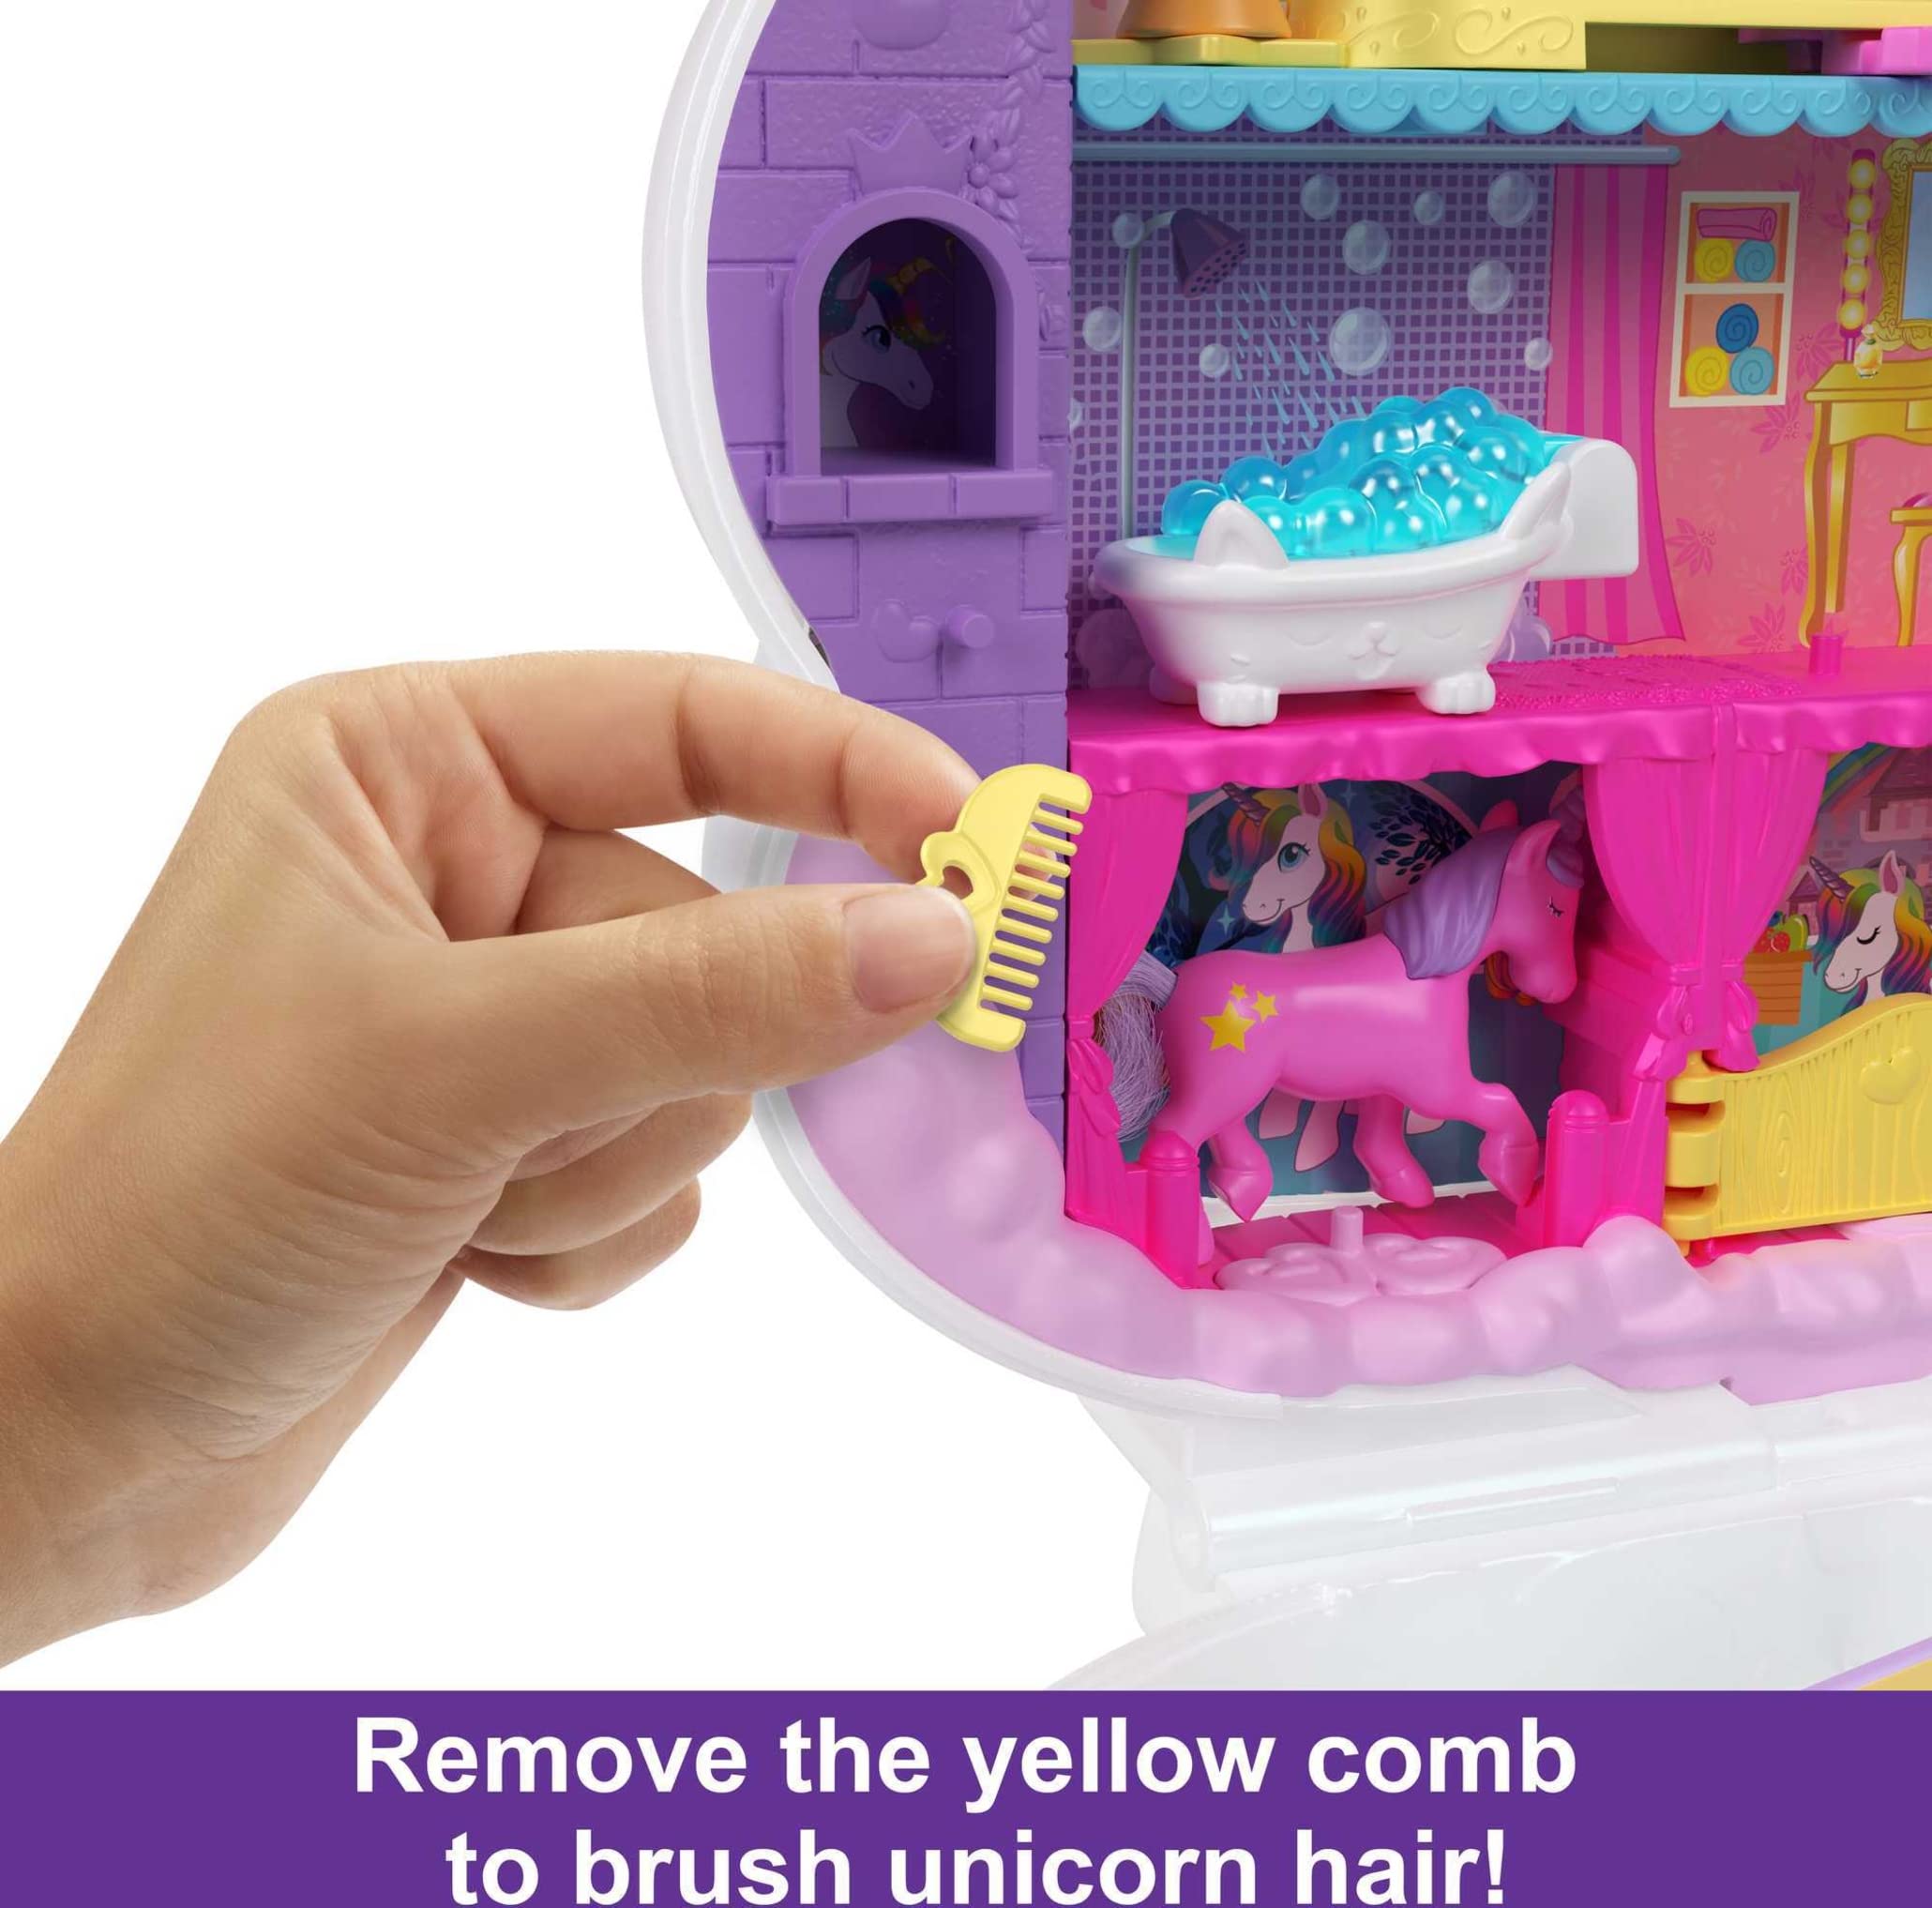 Polly Pocket 2-In-1 Travel Toy, Rainbow Unicorn Salon Styling Head with 2 Micro Dolls & 20+ Accessories